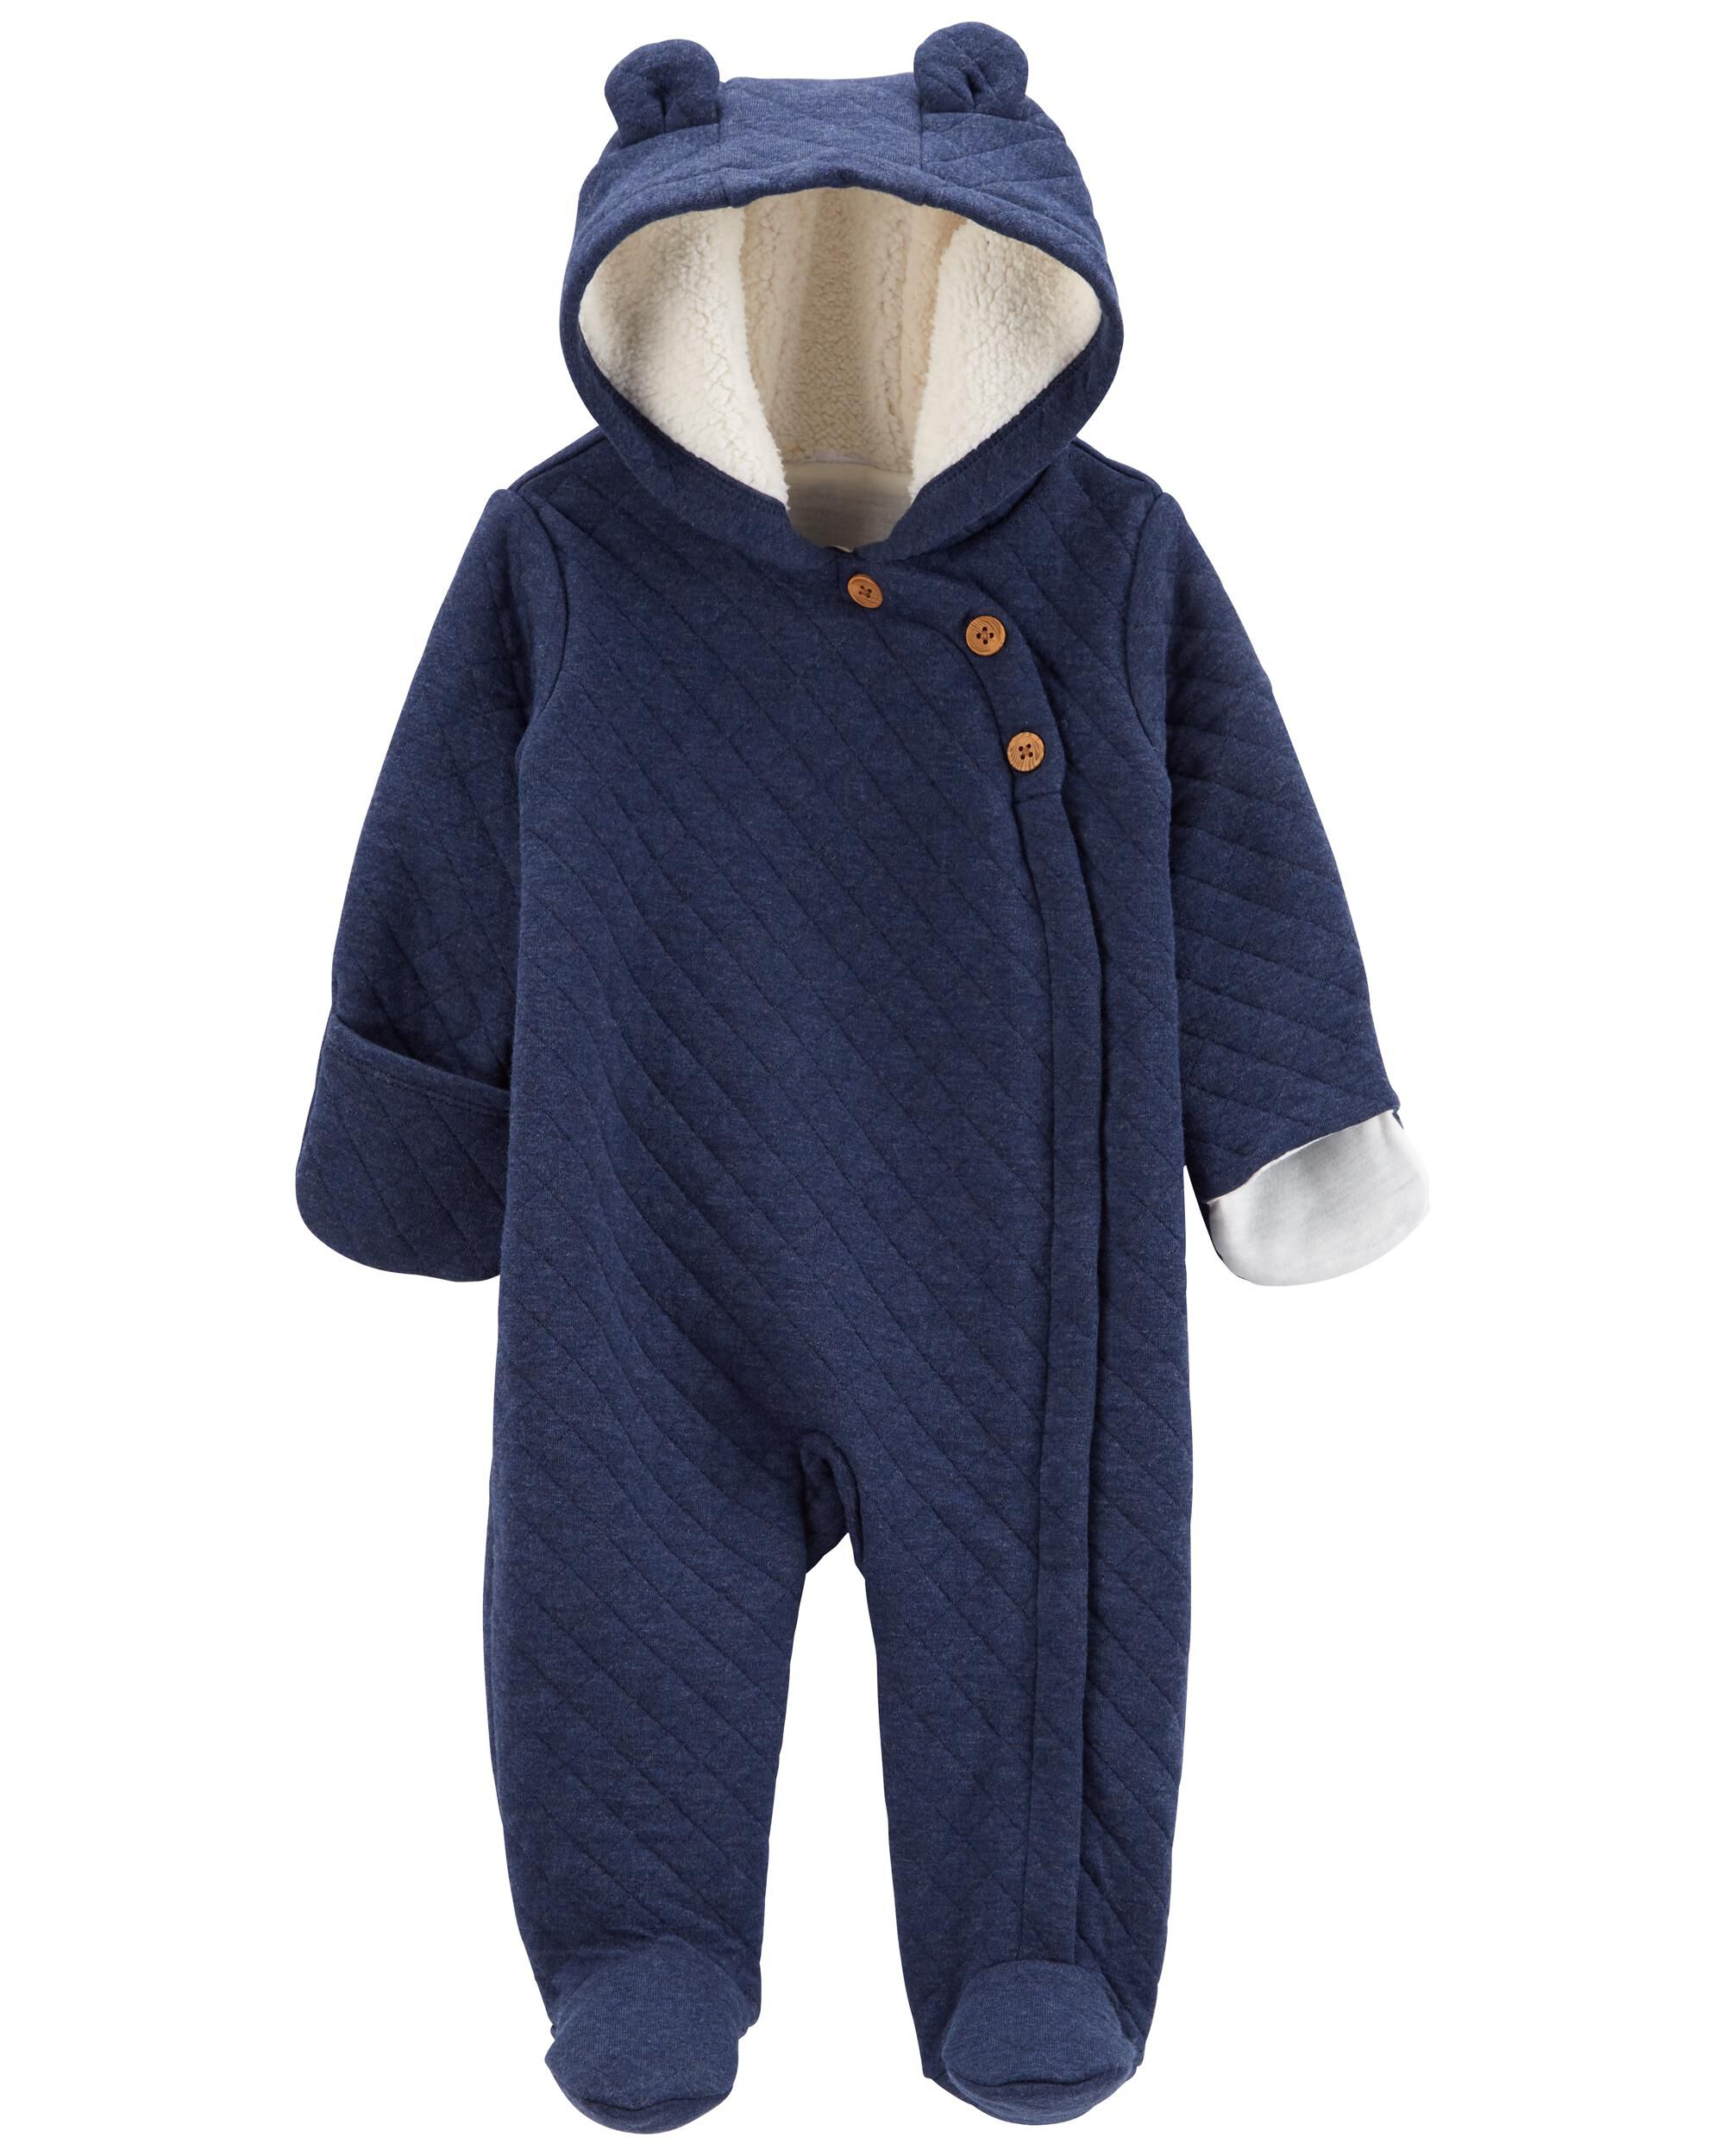 Carter's Baby Boys' Character Snowsuit 